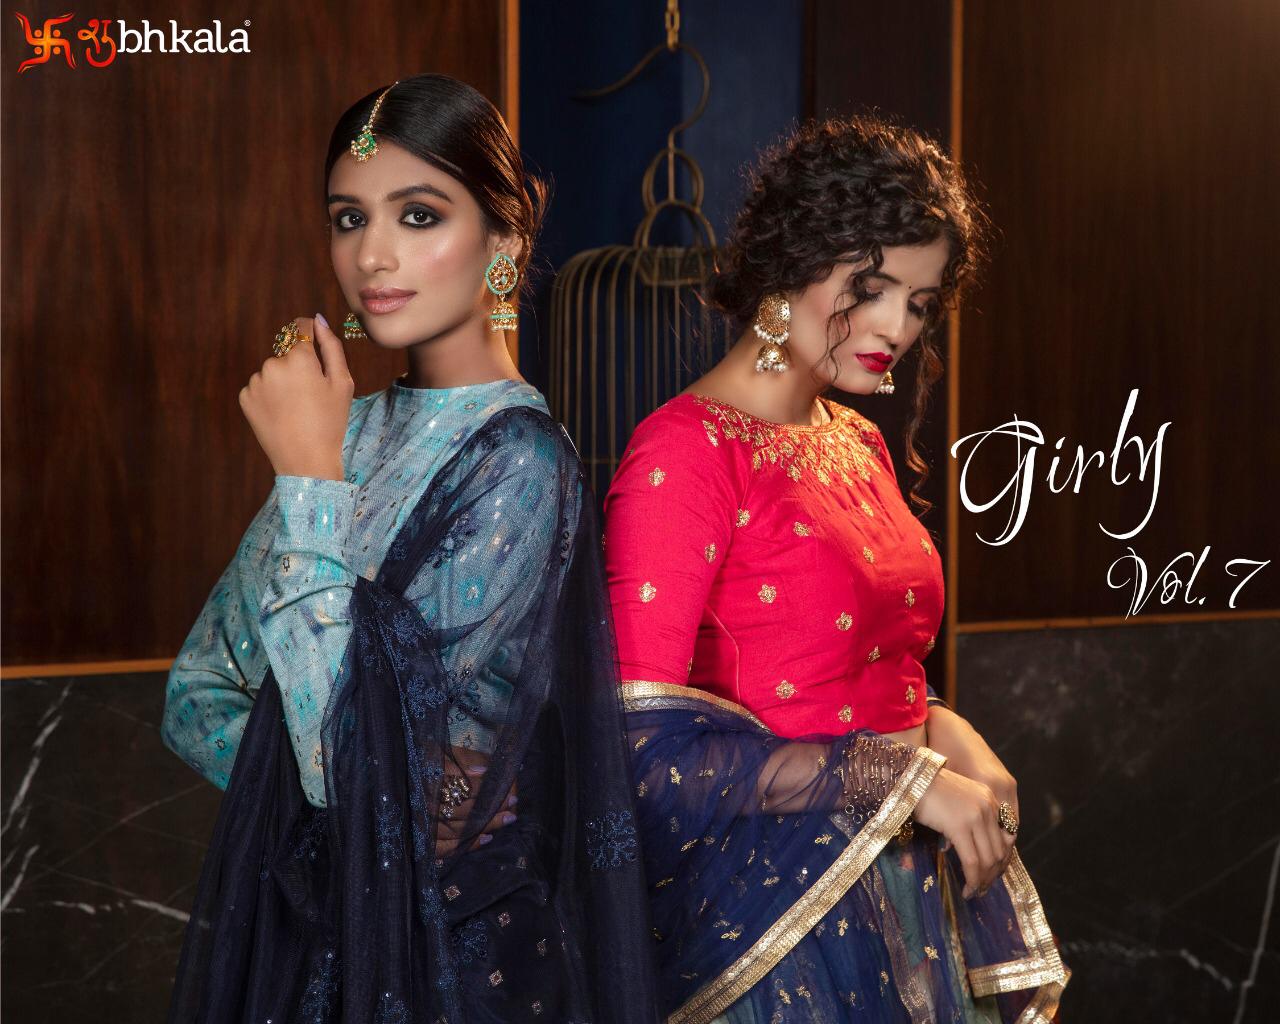 Girly Vol 7 By Khushboo Designer Exclusive Lehanga Choli Collection